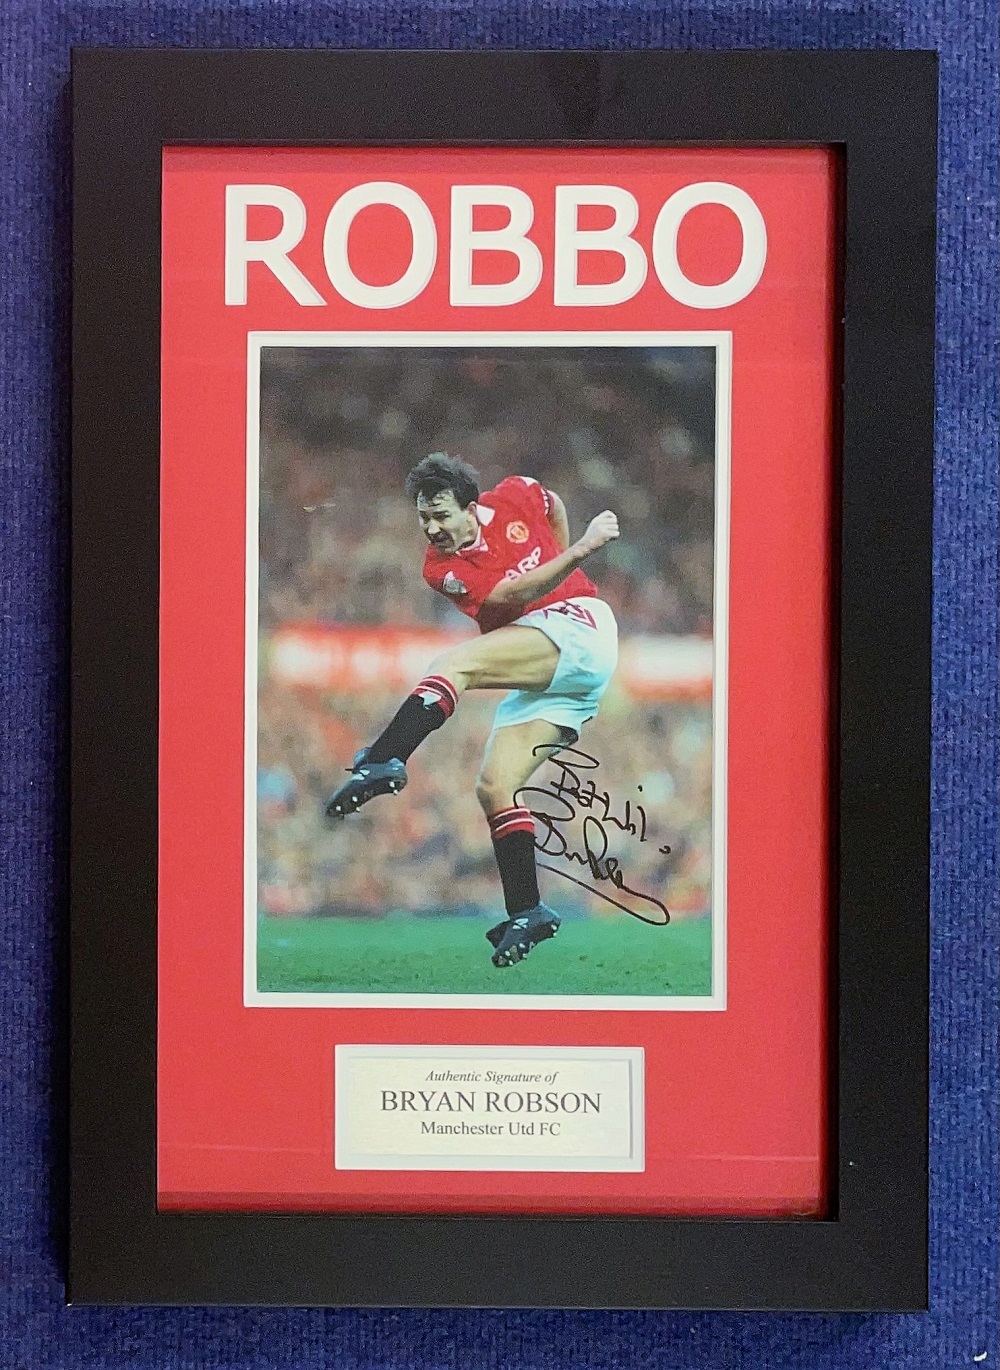 Football, Bryan Robson signed colour photograph, mounted and presented in a frame. With an approx